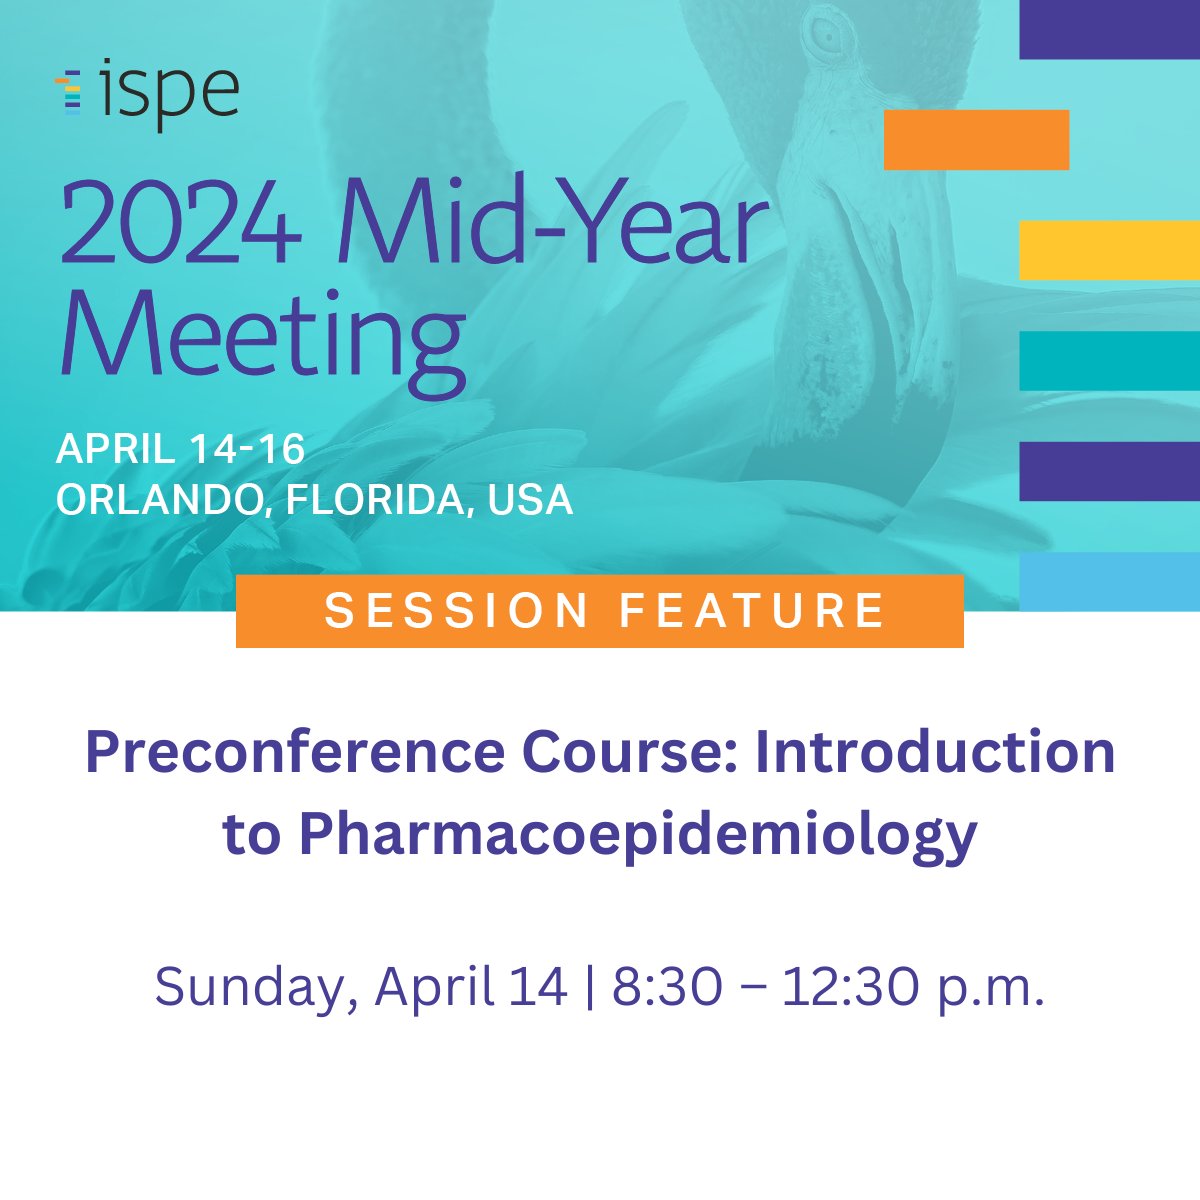 Elevate your understanding of #Pharmacoepidemiology at #ISPEMY2024 in less than two weeks Orlando, Florida with our Preconference Course outlining the basic principles, concepts & study designs of pharmacoepidemiology: bit.ly/4cwC1lt #PharmacoEpi #EpiTwitter #RWE